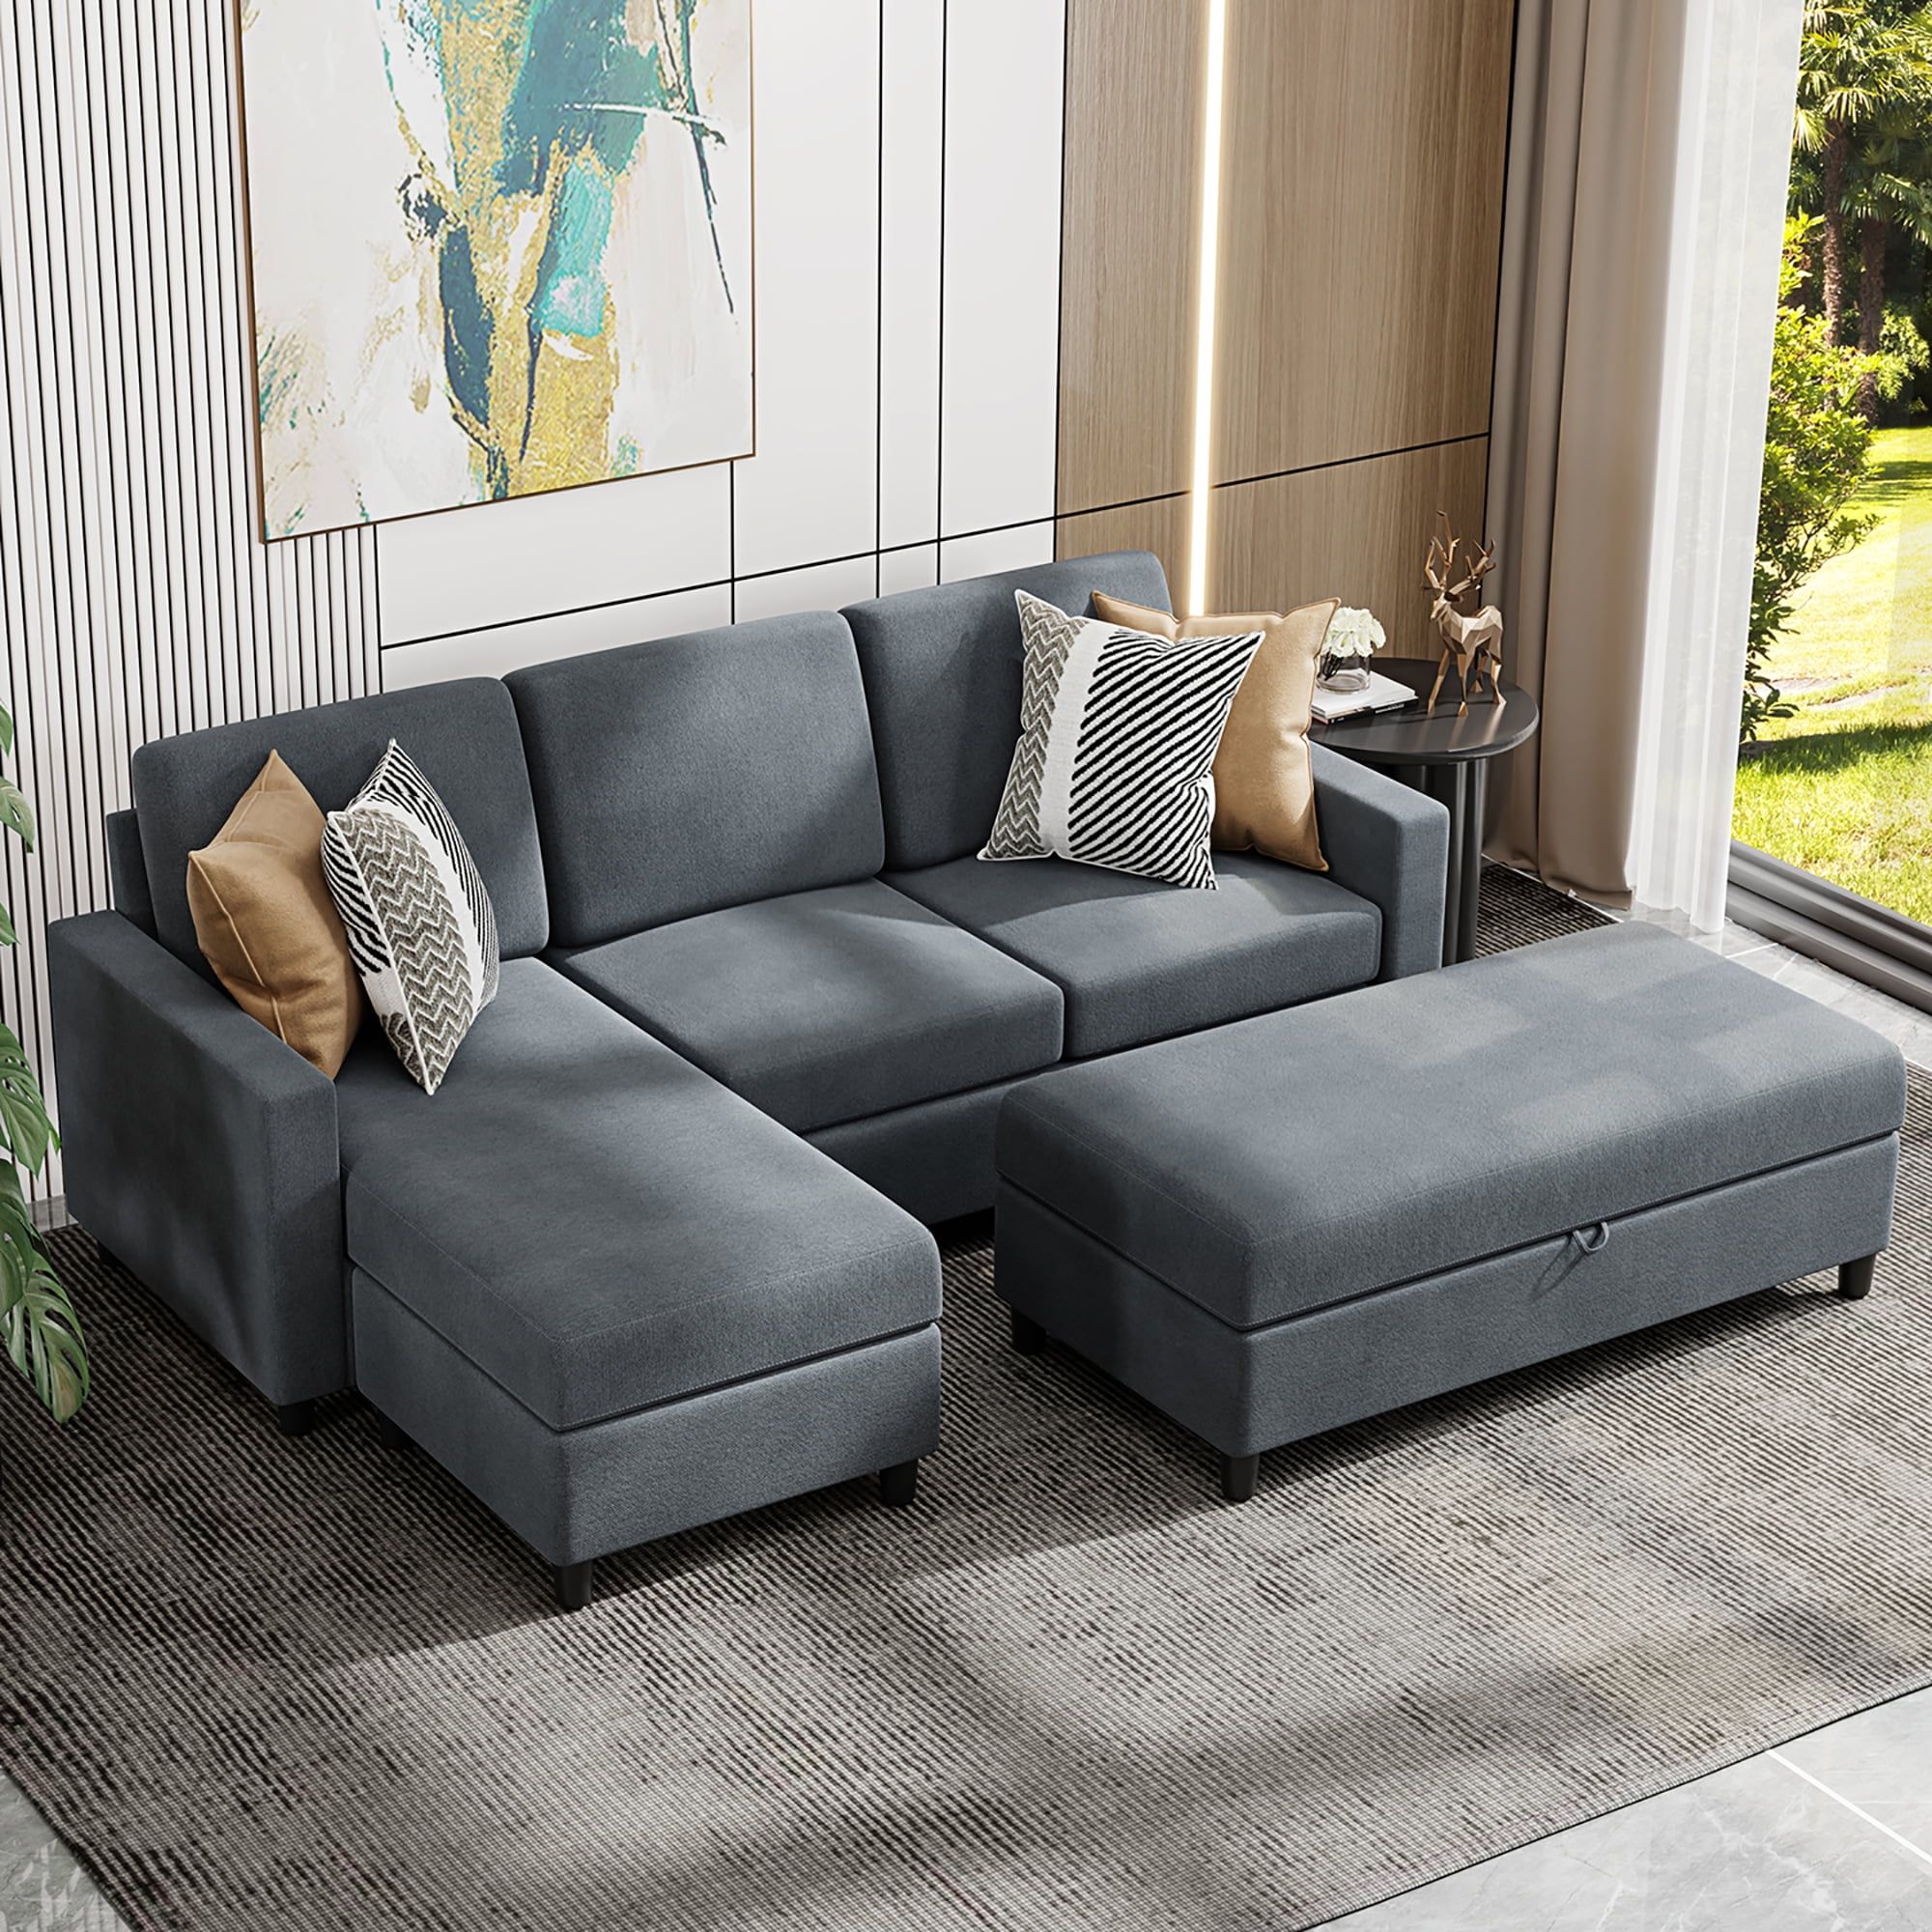 Convertible Sectional Sofa Couch With Storage Ottoman, L Shaped Wide  Reversible Chaise With Linen Fabric(charcoal Grey) – Walmart Regarding Convertible L Shaped Sectional Sofas (Photo 1 of 24)